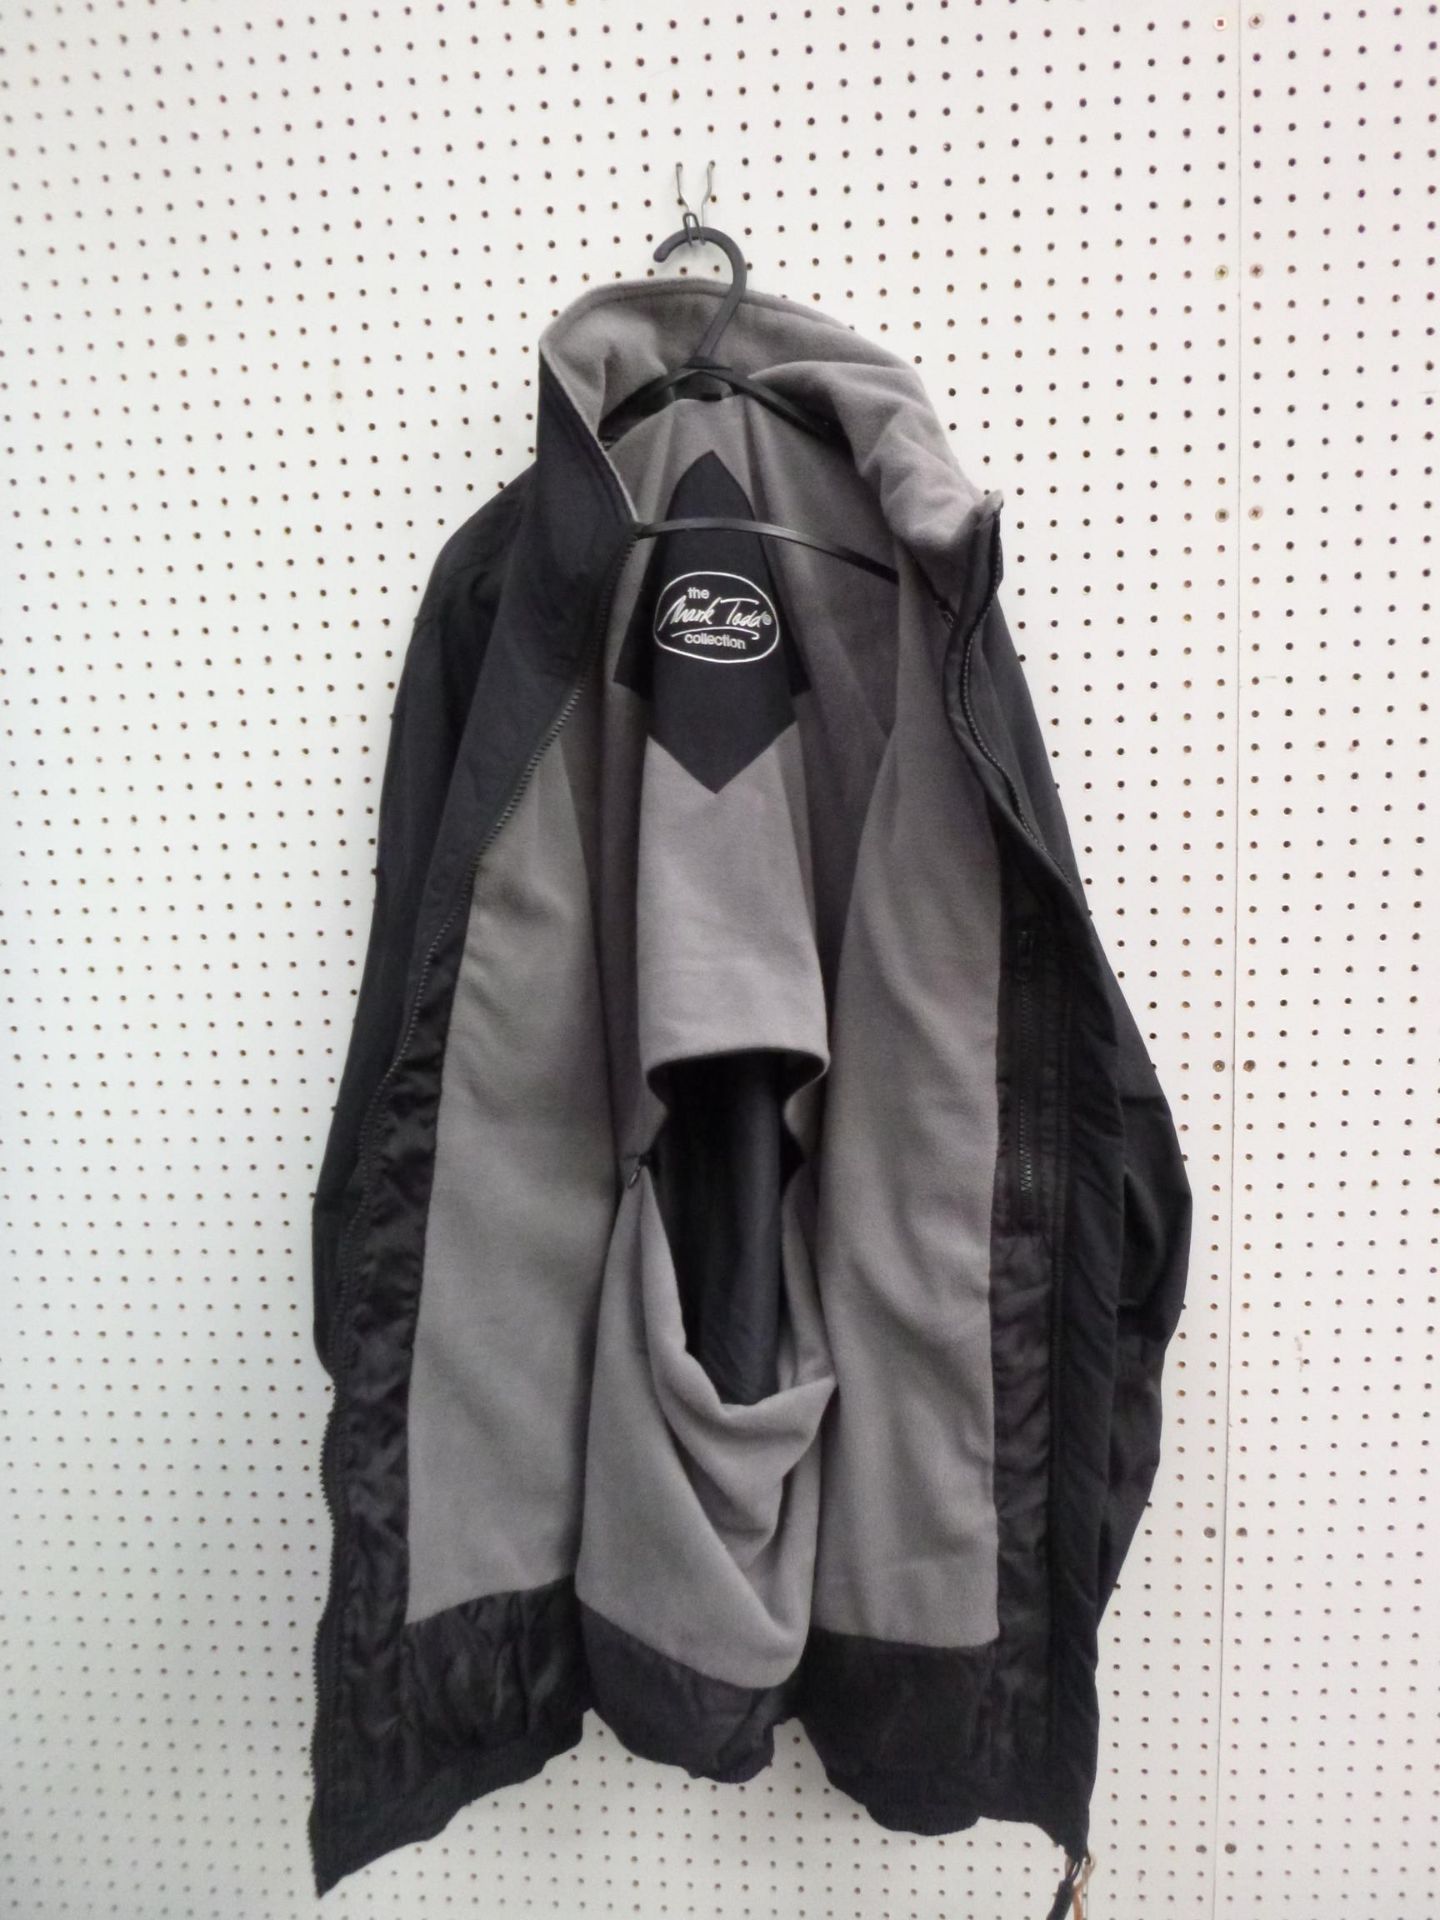 * A New 'Mark Todd' Fleece Lined Blouson Jacket in Black/Grey Size X-Large RRP £47.99 - Image 2 of 3